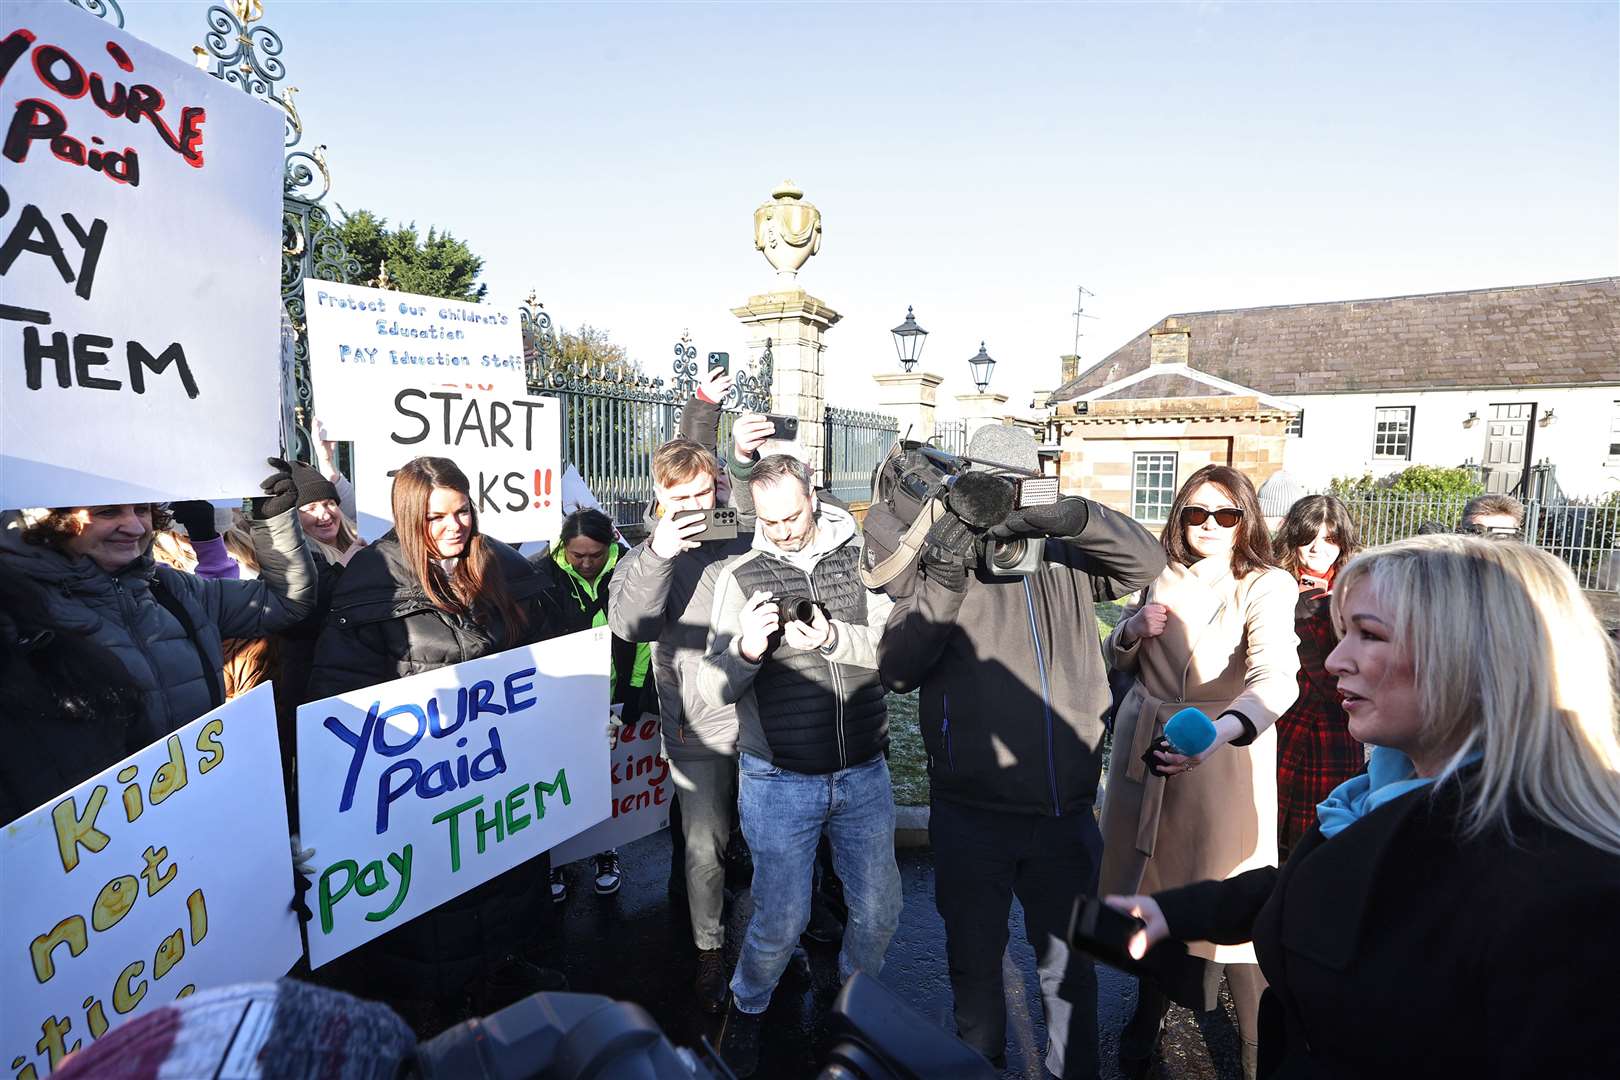 Sinn Fein vice-president Michelle O’Neill (right) speaks to protesters from the Colin Autism Support and Advice Group as they protest outside Hillsborough Castle on Monday (Liam McBurney/PA)